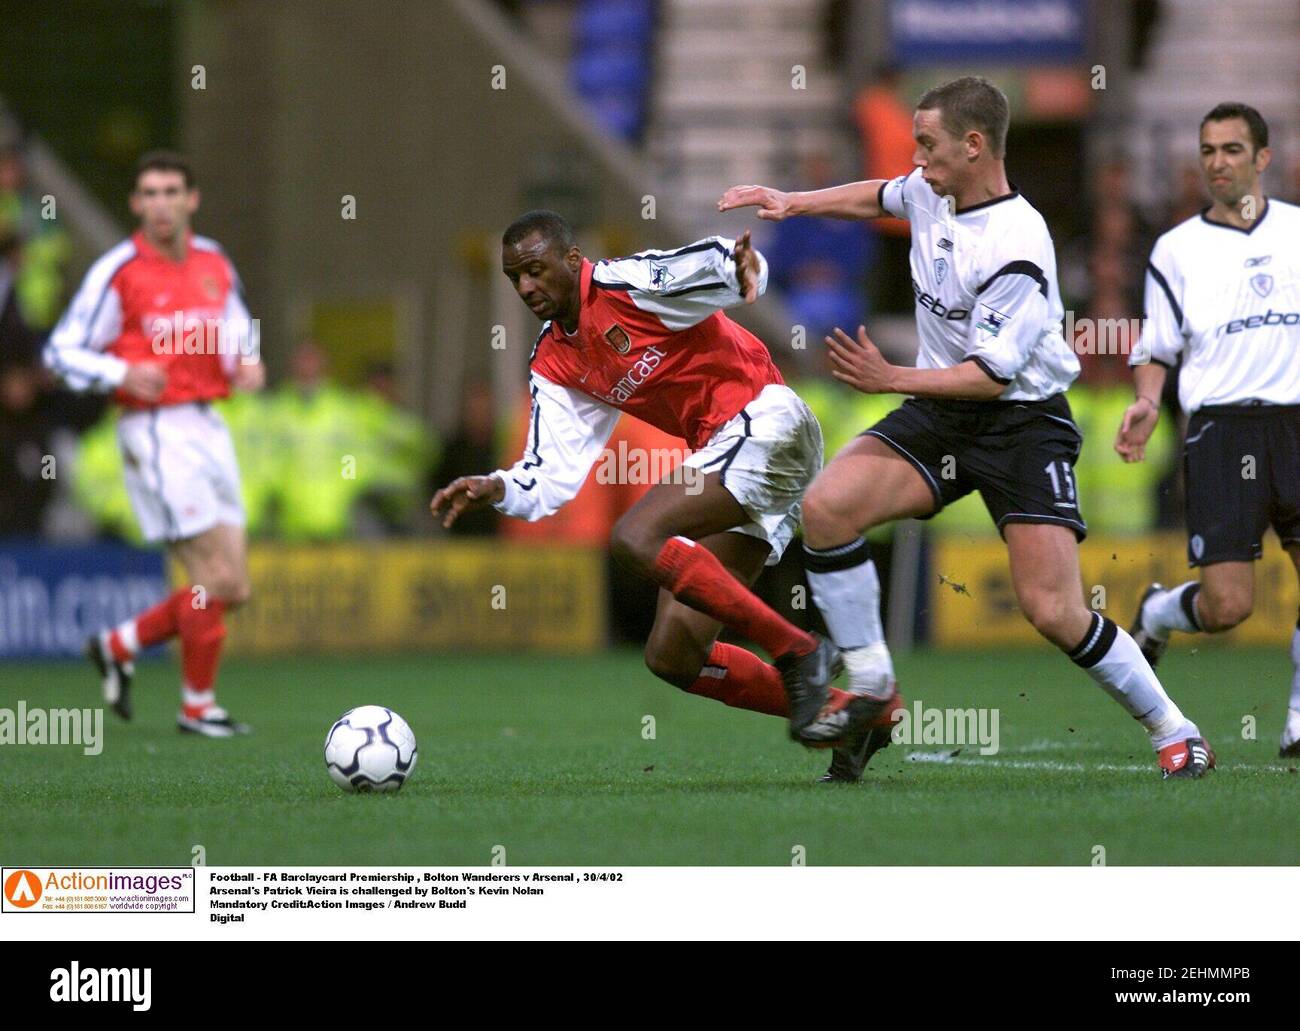 Football - FA Barclaycard Premiership , Bolton Wanderers v Arsenal , 29/4/02  Arsenal's Patrick Vieira is challenged by Bolton's Kevin Nolan  Mandatory Credit:Action Images / Andrew Budd  Digital Stock Photo